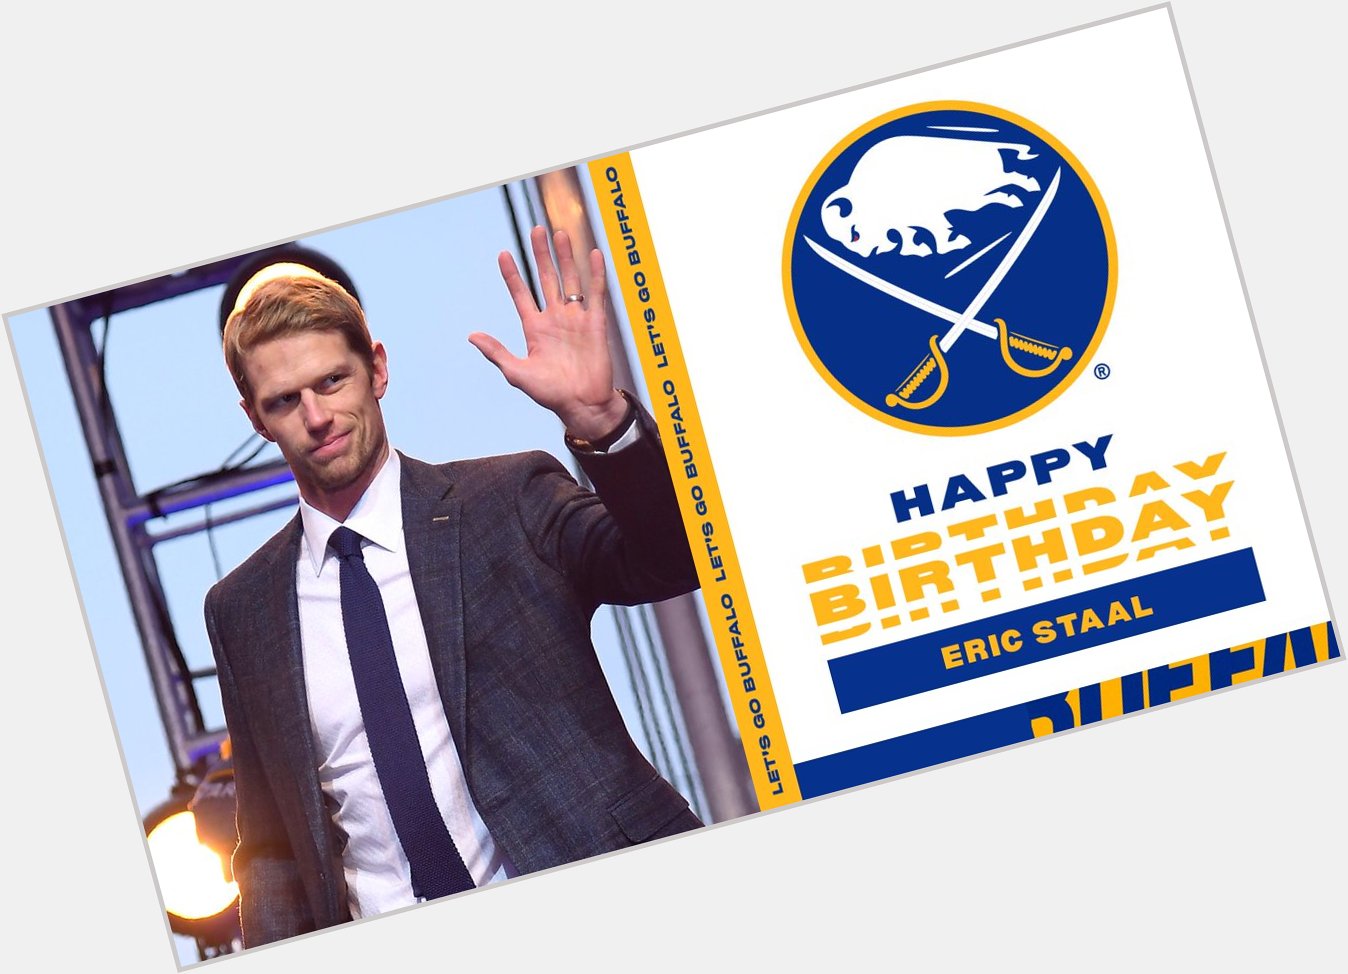 Happy birthday to Eric Staal! Show him some birthday love in the comments, Buffalo  